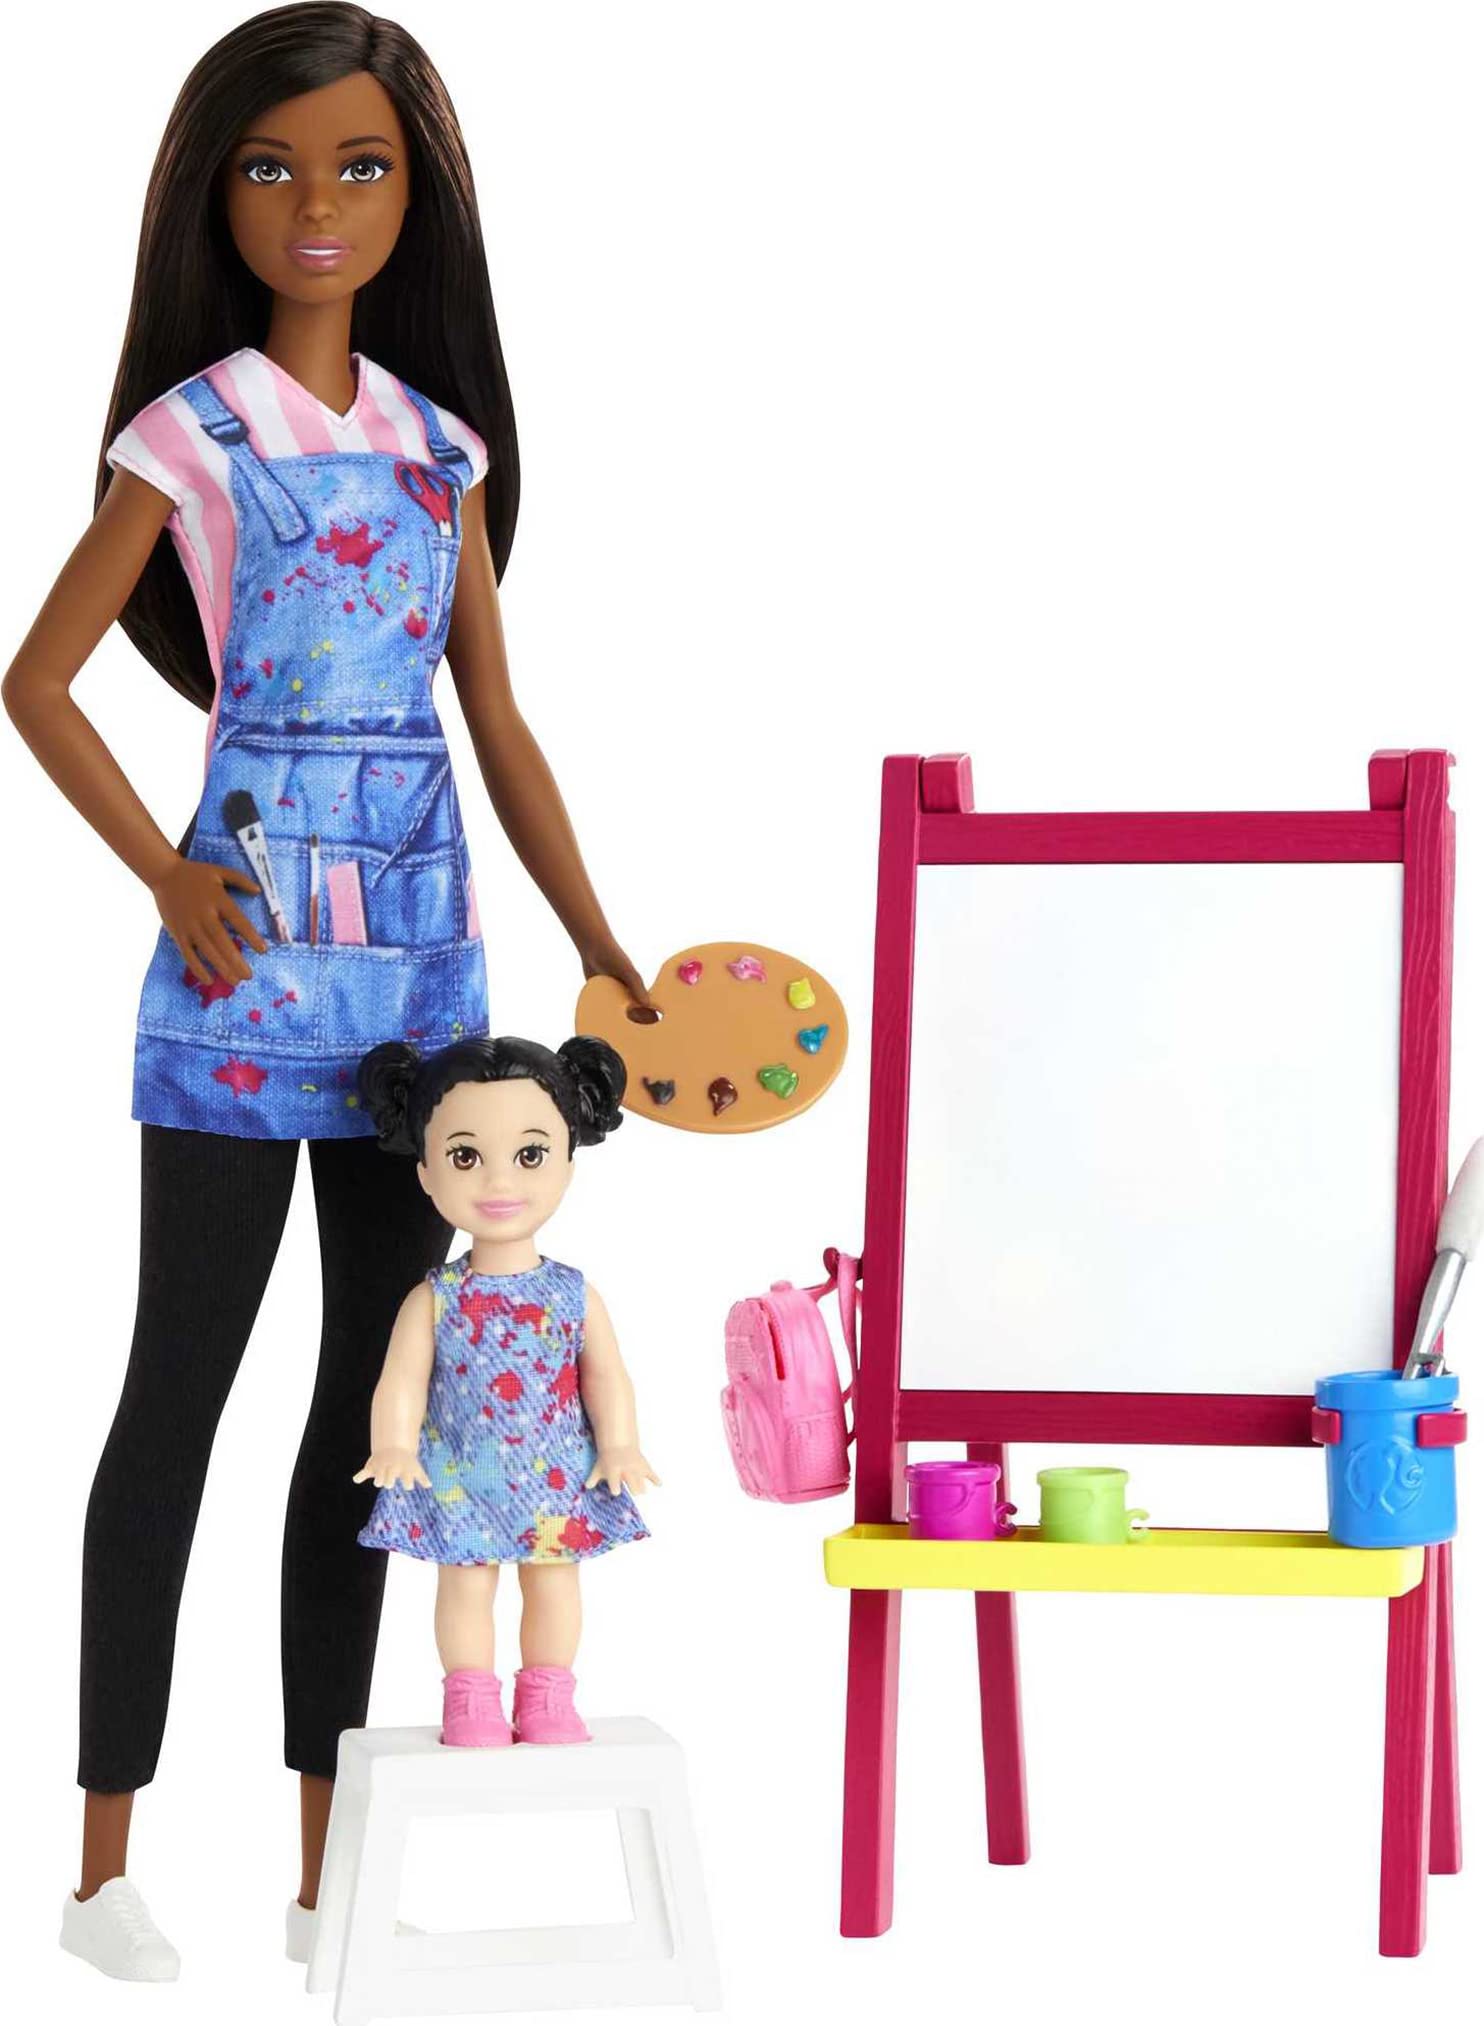 Barbie Careers Doll & Playset, Art Teacher Theme with Brunette Doll, 1 Toddler Doll, Color-Change Easel & Accessories